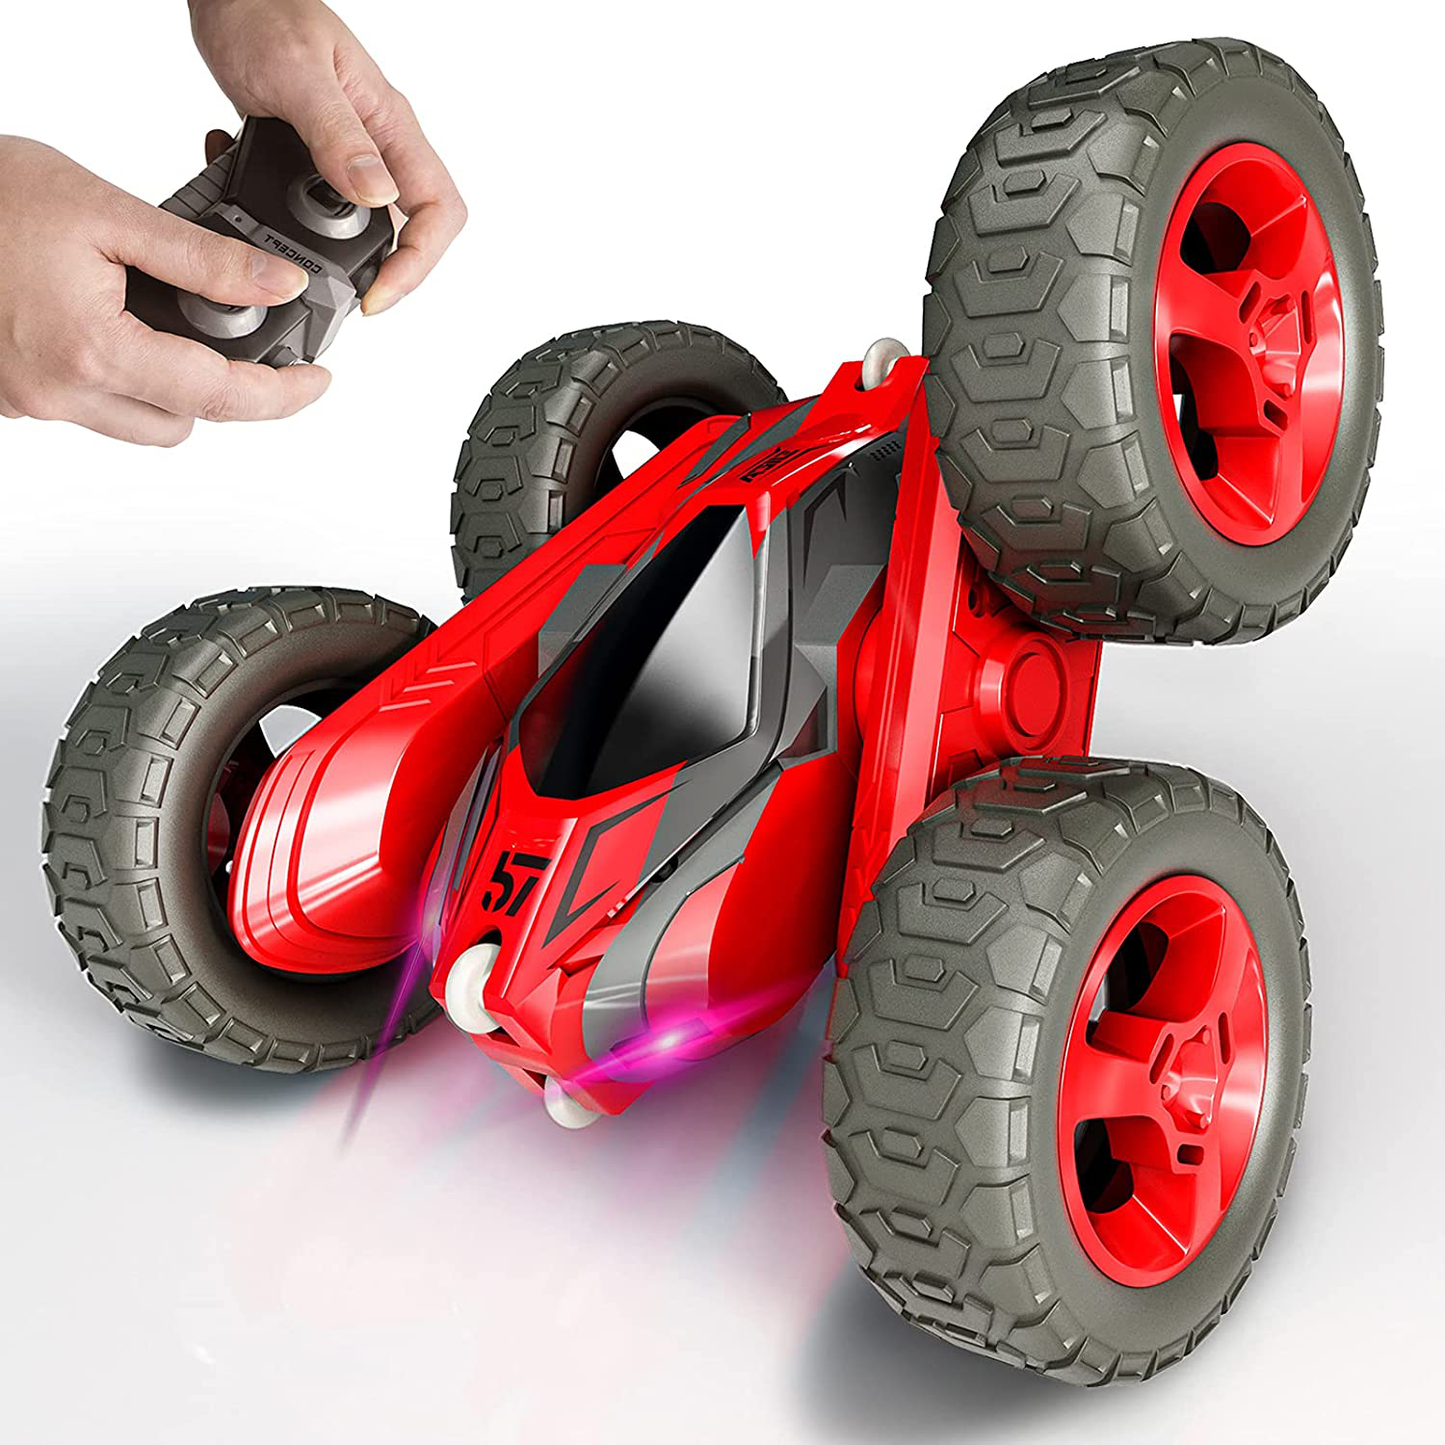 Tecnock Remote Control Car for Kids,360 ° Rotating Double Sided Flip RC Stunt Car,2.4Ghz 4WD Toy Car with Rechargeable Battery for 45 Min Play,Great Gifts for Boys and Girls(Red)